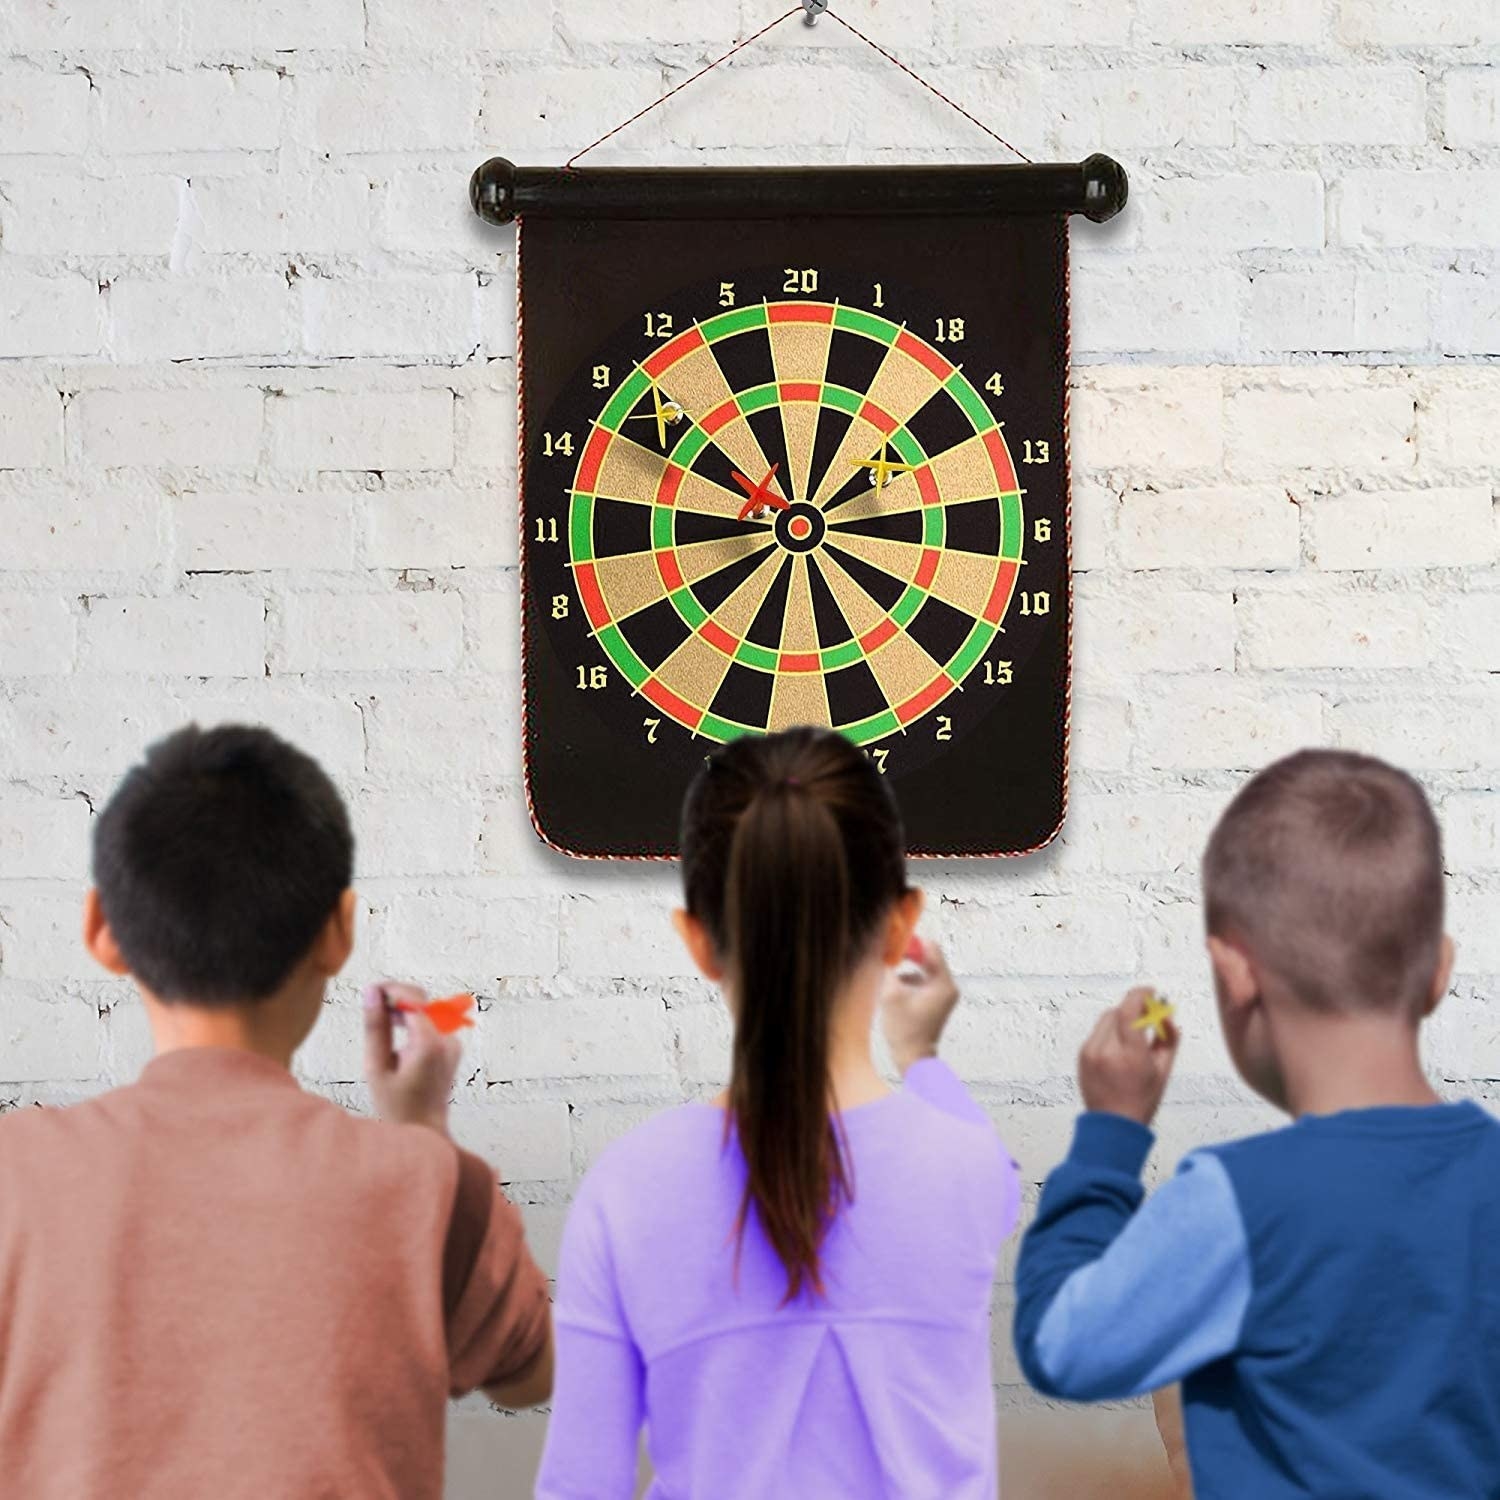 the dart board hung up and three kids about to throw darts at it